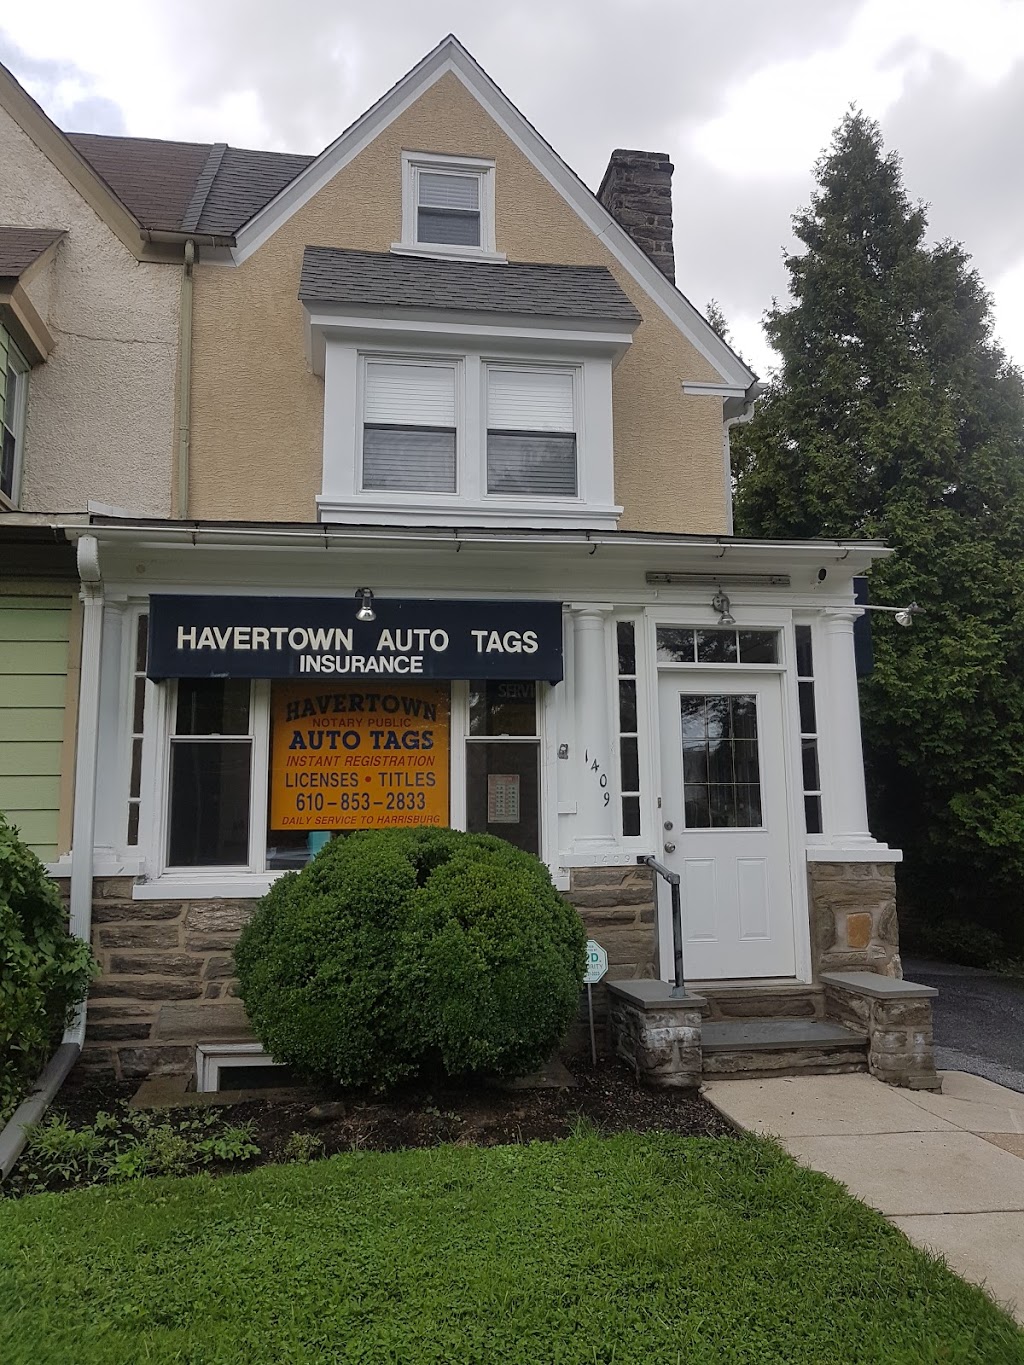 Havertown Auto Tags | 1409 Darby Rd, Havertown, PA 19083 | Phone: (610) 853-2833